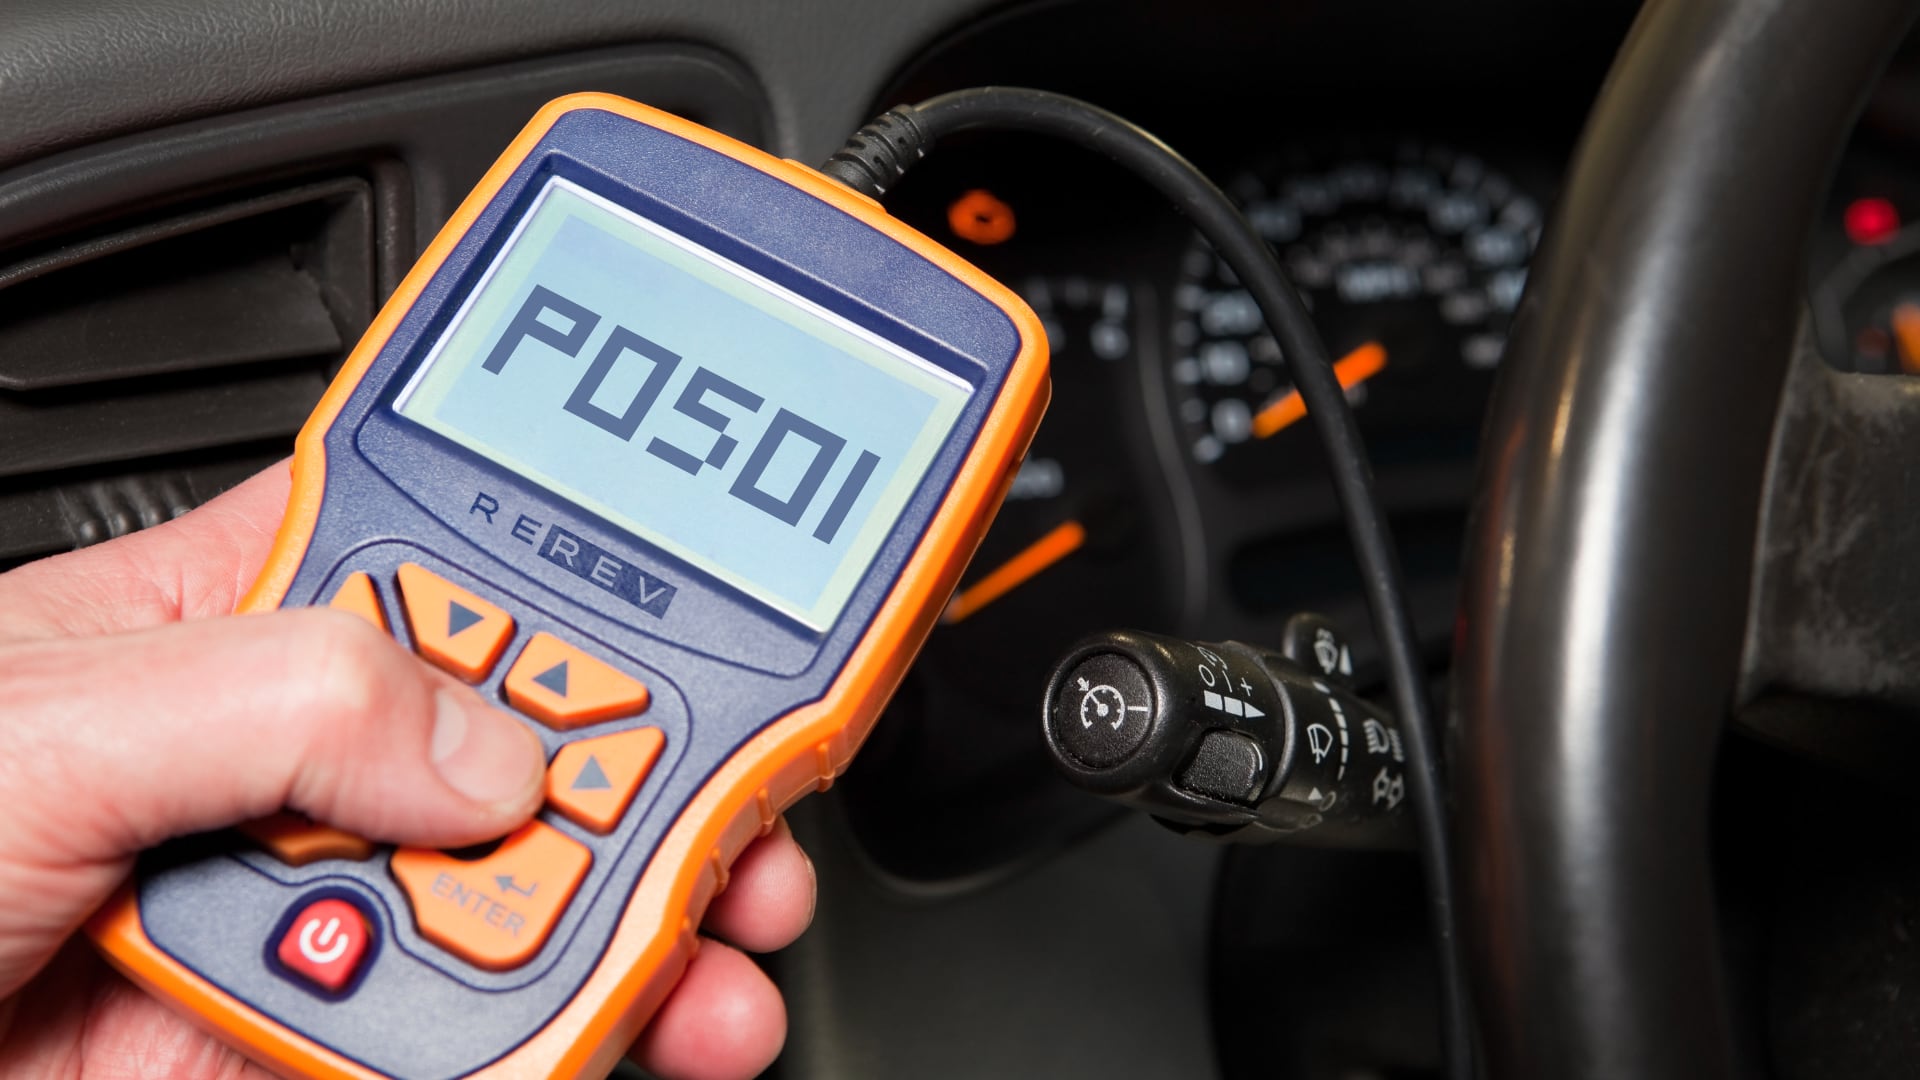 A person is holding a posii device in a car.